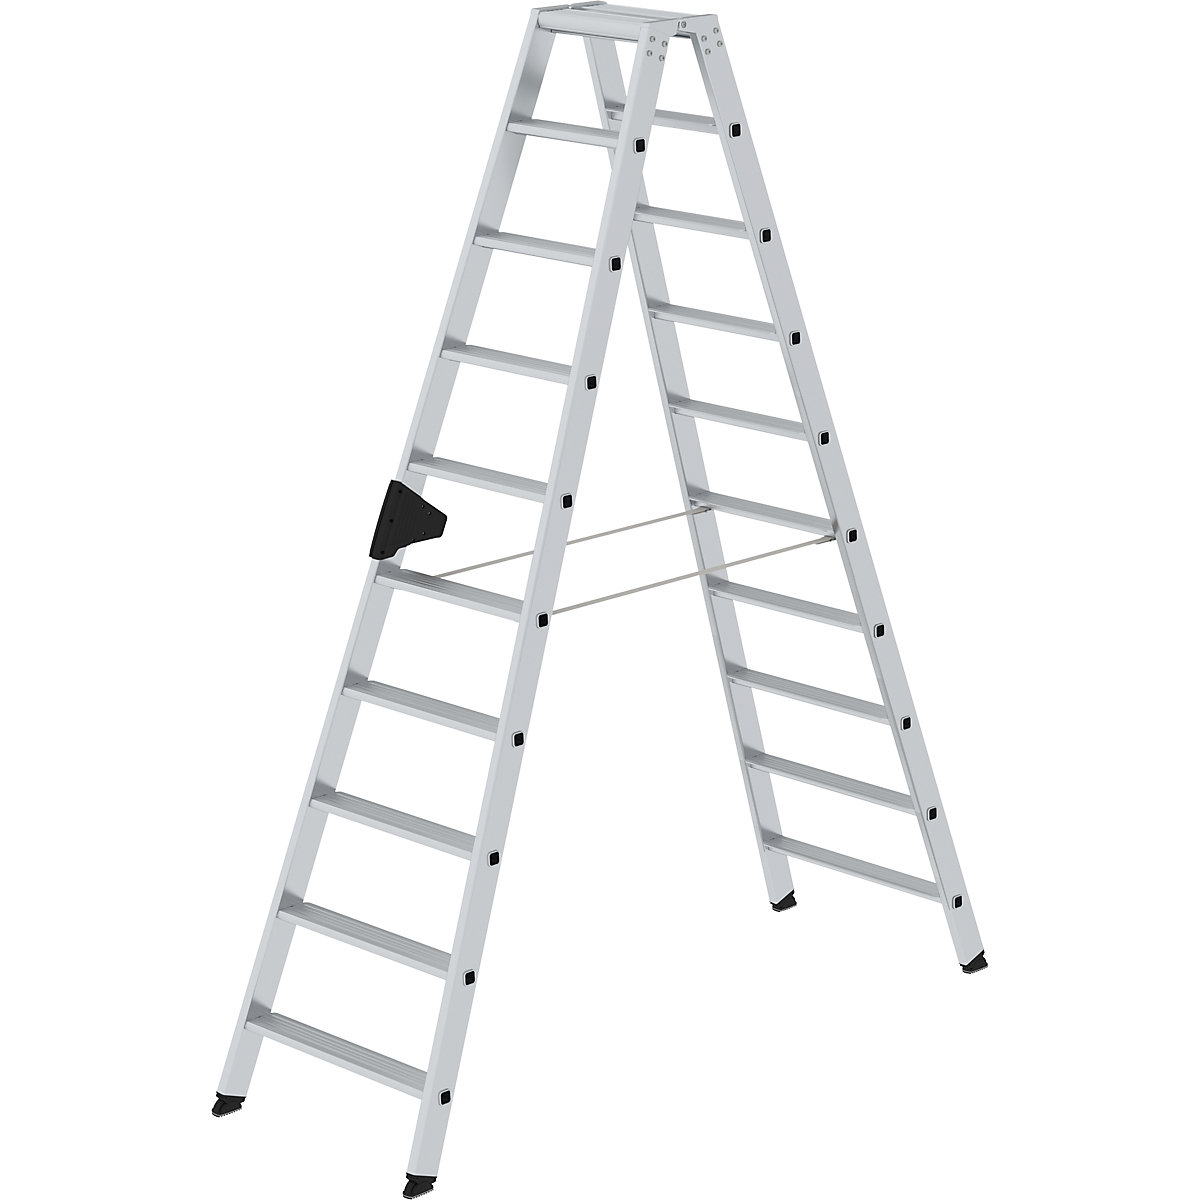 Step ladder, double sided – MUNK, comfort model with ergo pad®, 2x10 steps-12